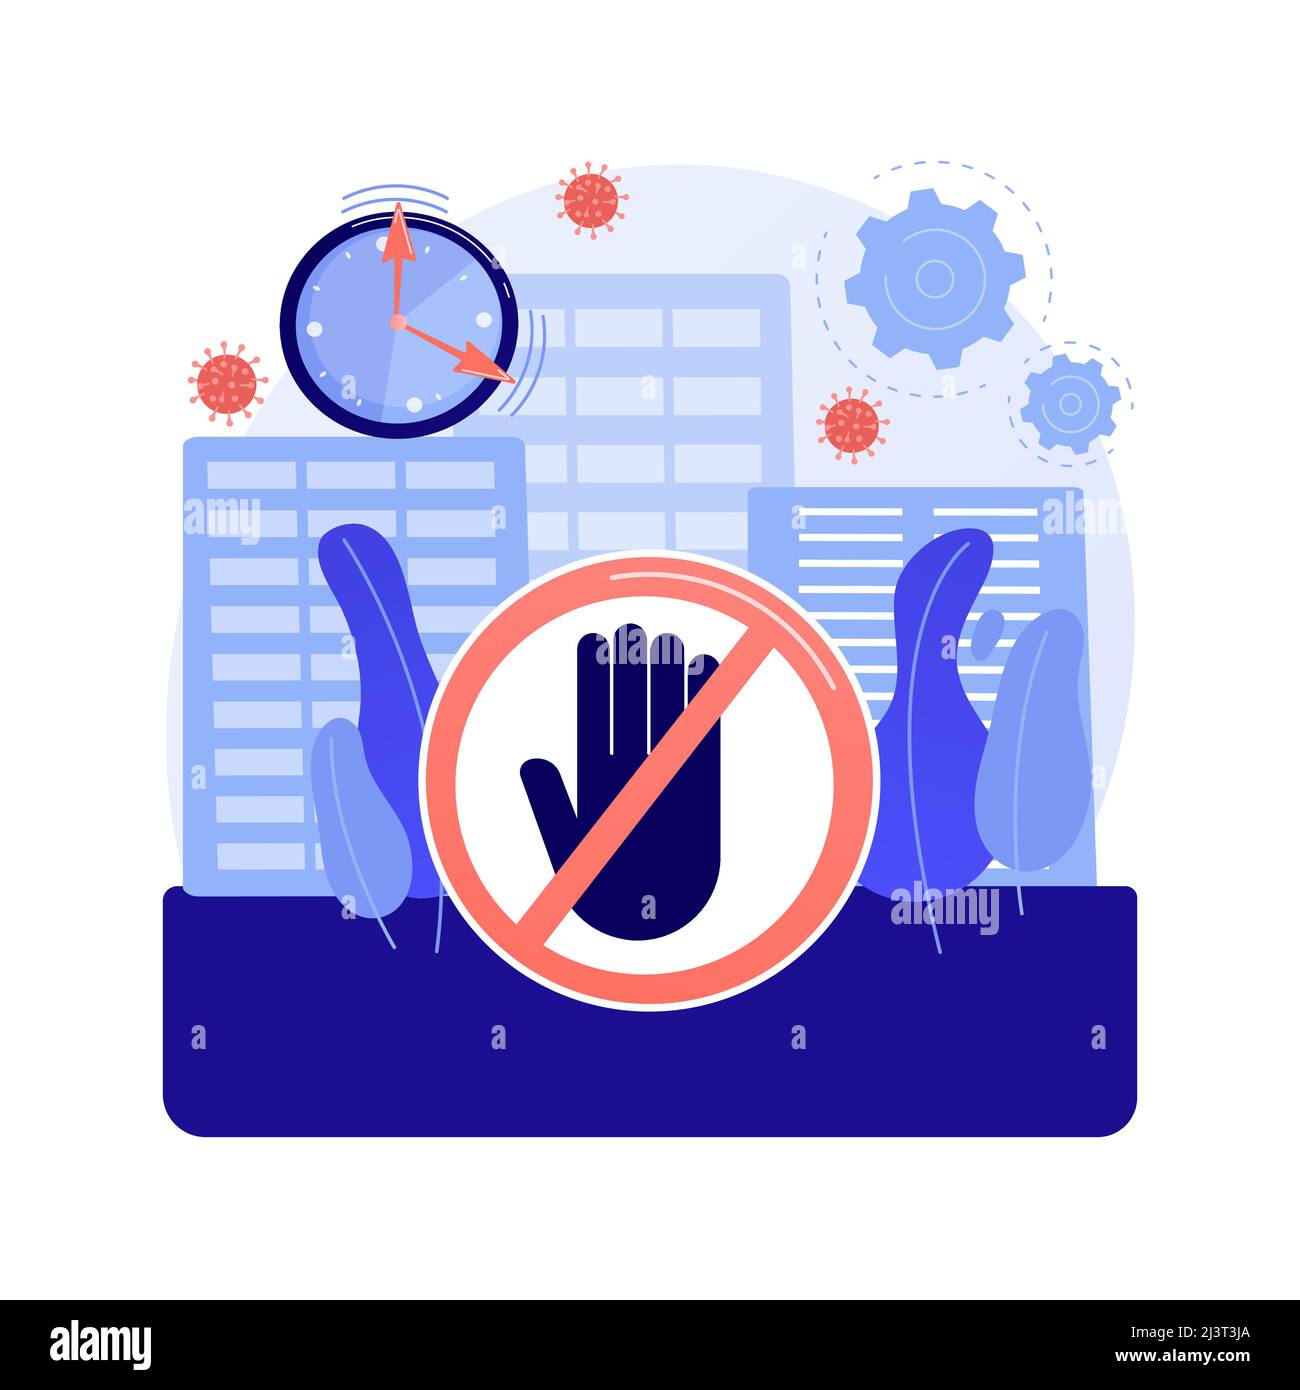 Curfew abstract concept vector illustration. Public protest, demonstration, mass unrest, street crowd, meeting, vandalism and looting, stay home restr Stock Vector